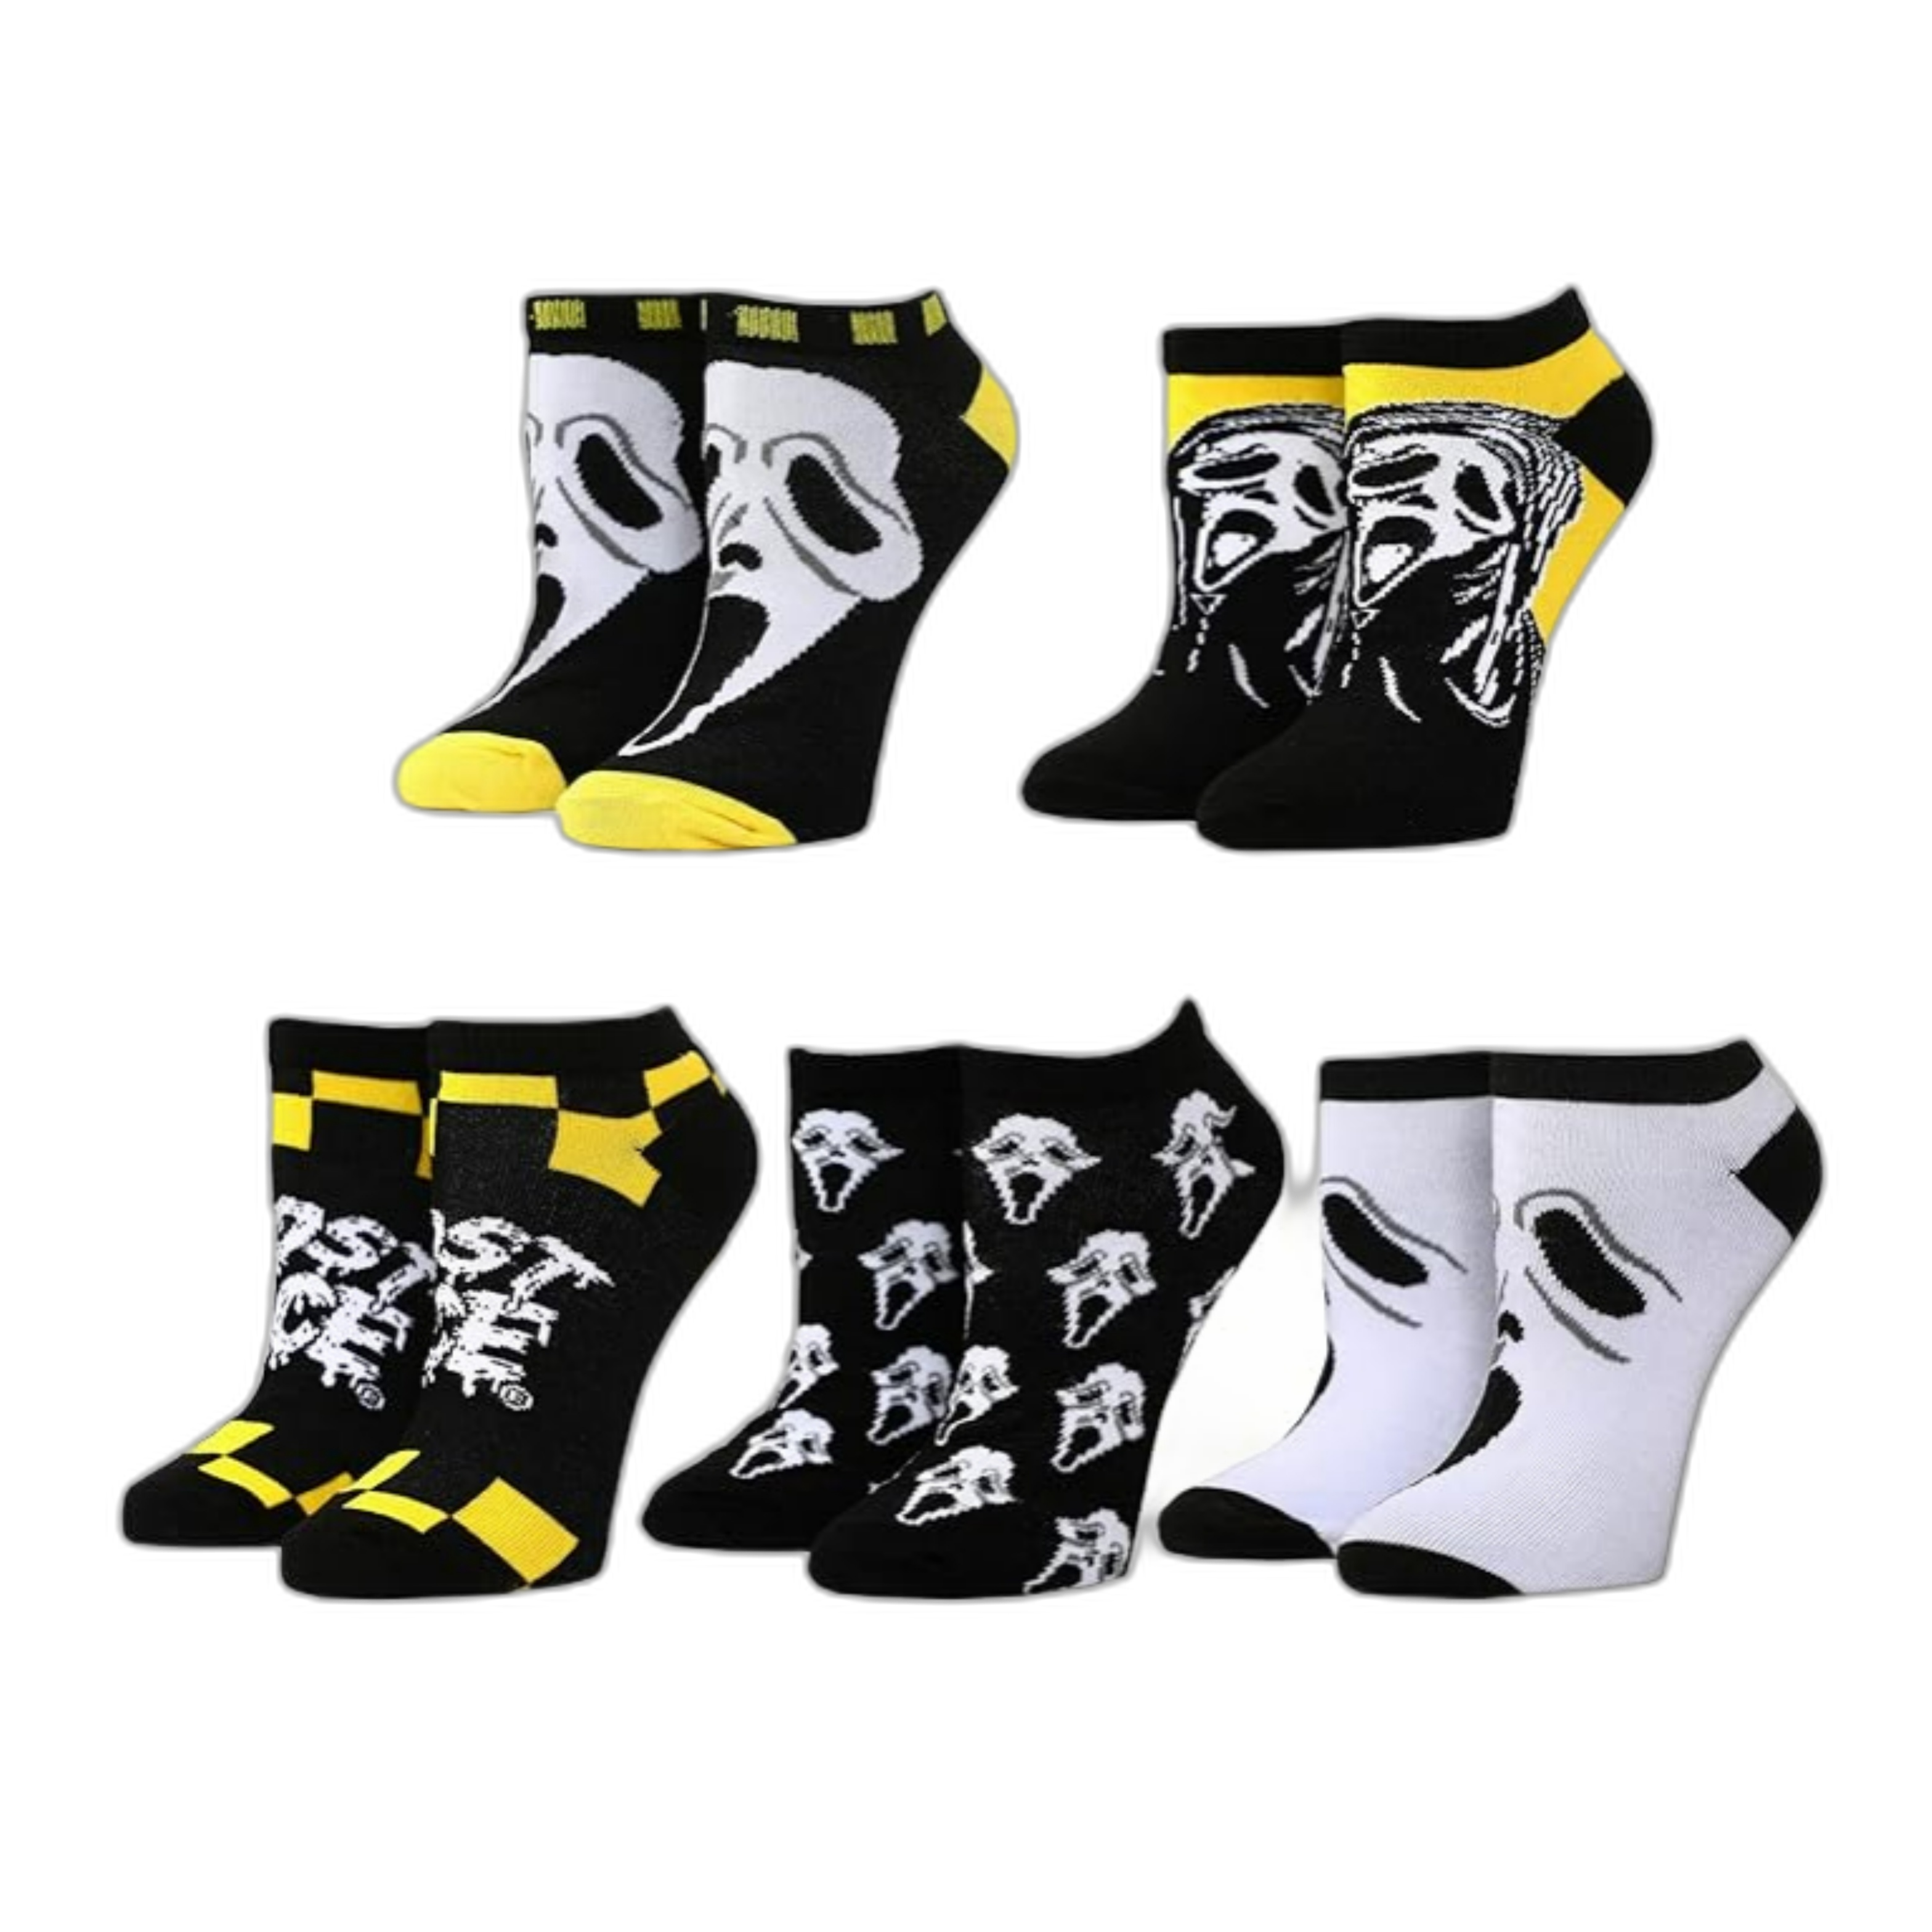 5 pairs of Scream Ghostface inspired ankle socks, each with their own unique patterns, but all featuring the slasher killer. 